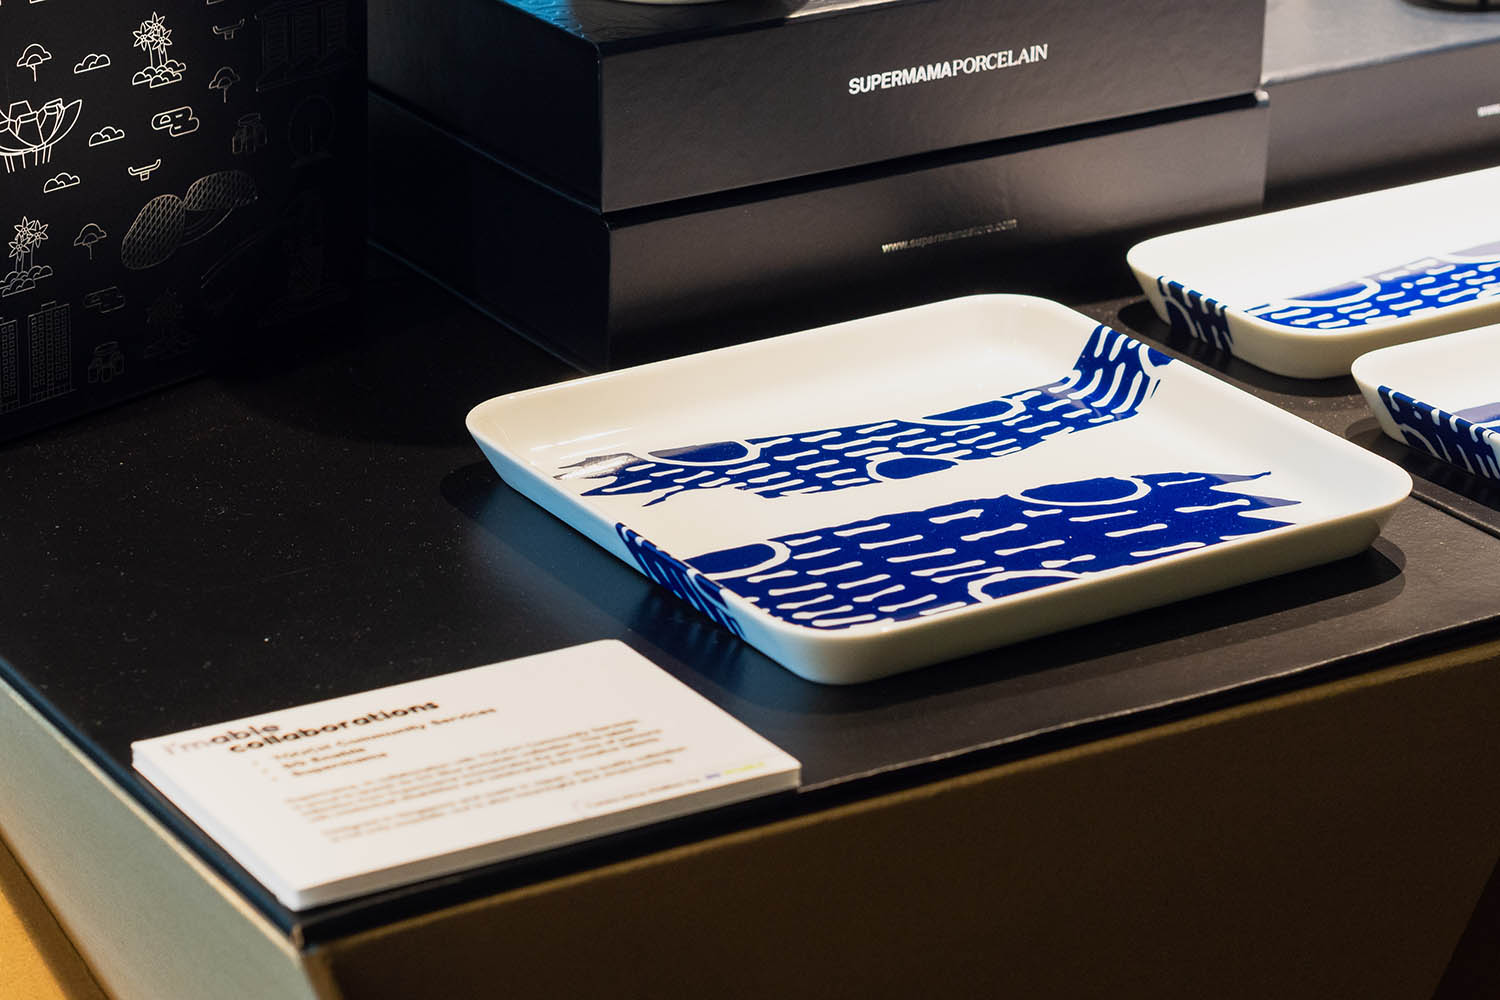 A display of a few porcelain plates with blue motifs, with black boxes in the background. The text on the boxes reads, SUPERMAMAPORCELAIN